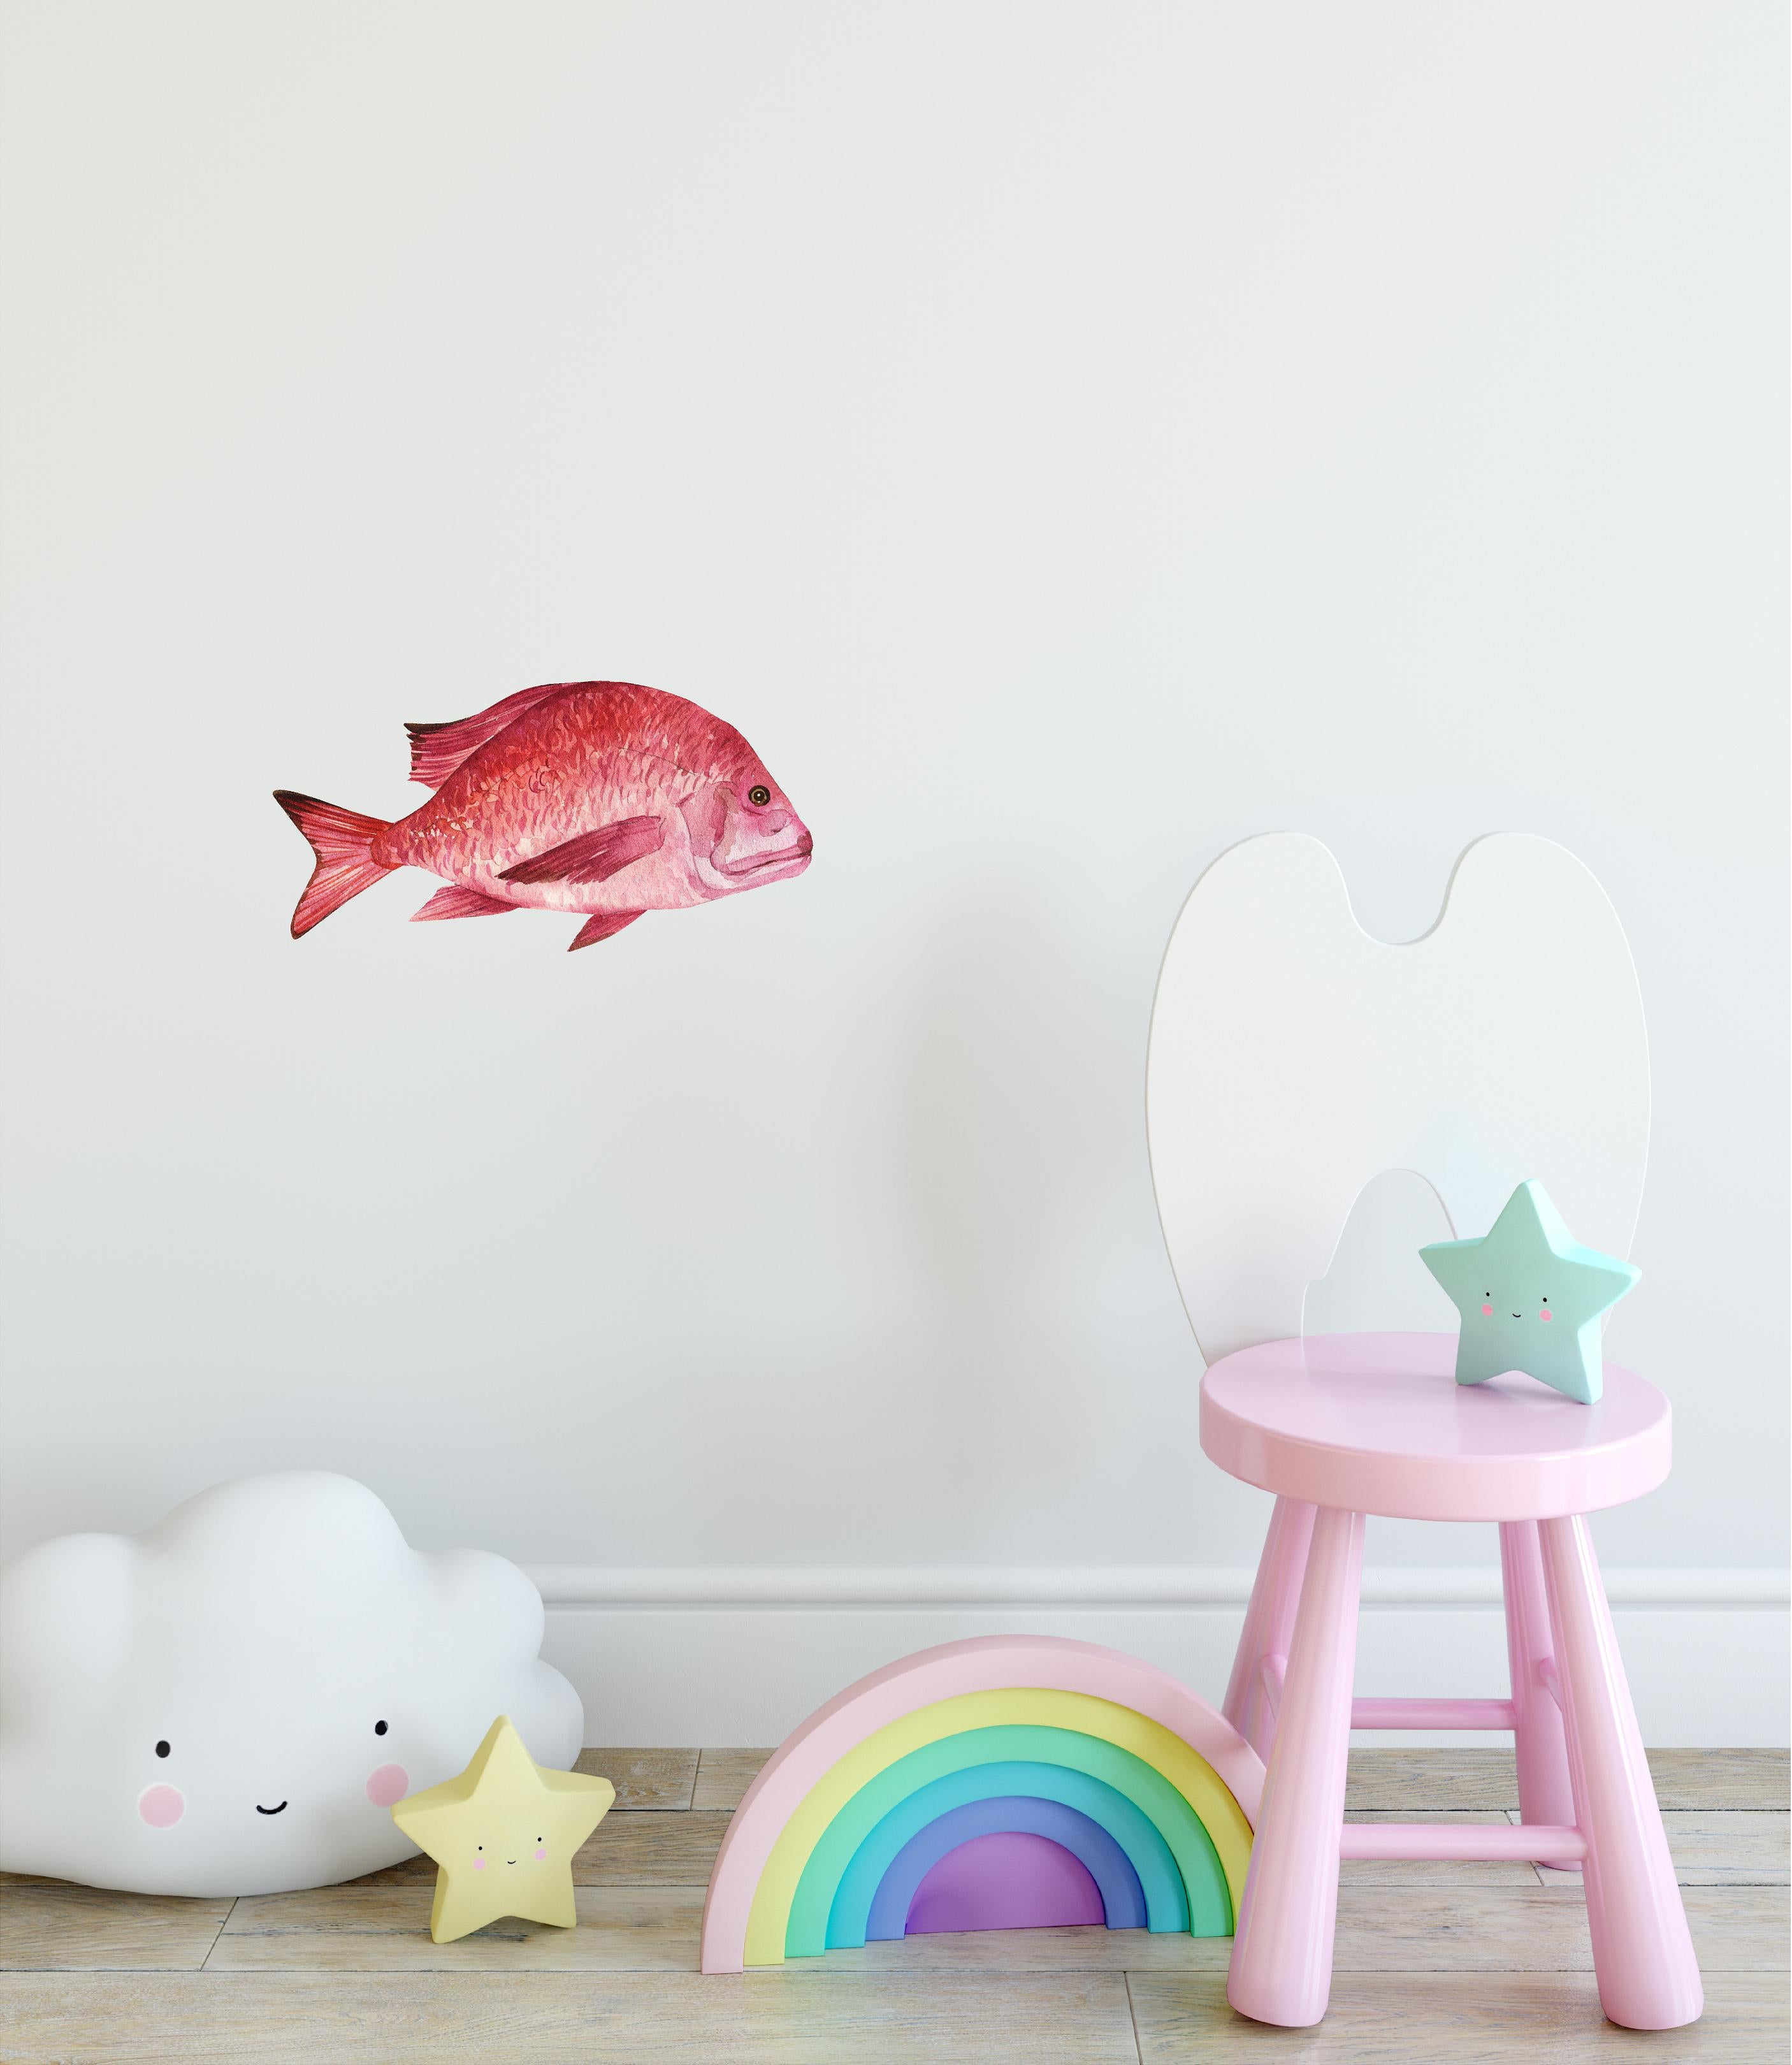 Red Snapper Fish Wall Decal Watercolor Marine Fish Fabric Wall Sticker | DecalBaby